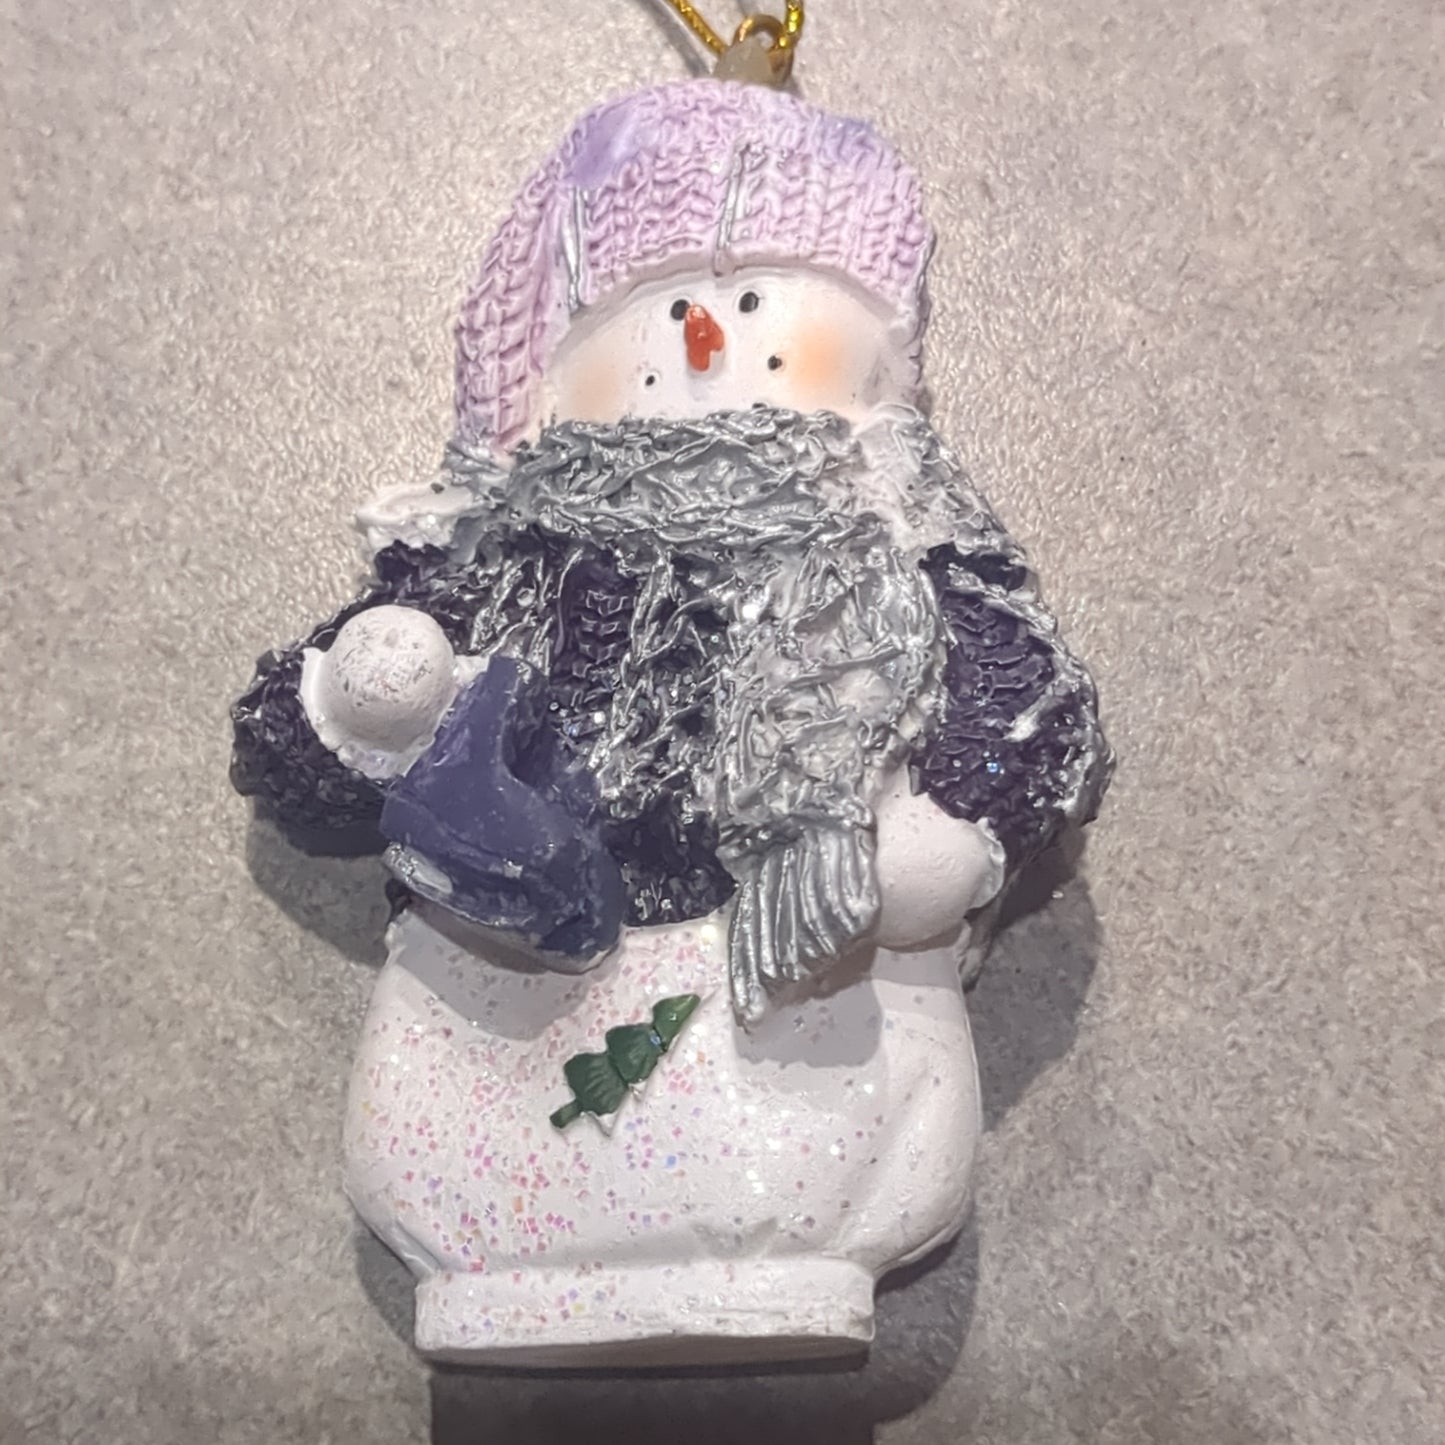 Polycrylic snowman ornament with an ice skate lilac and purple